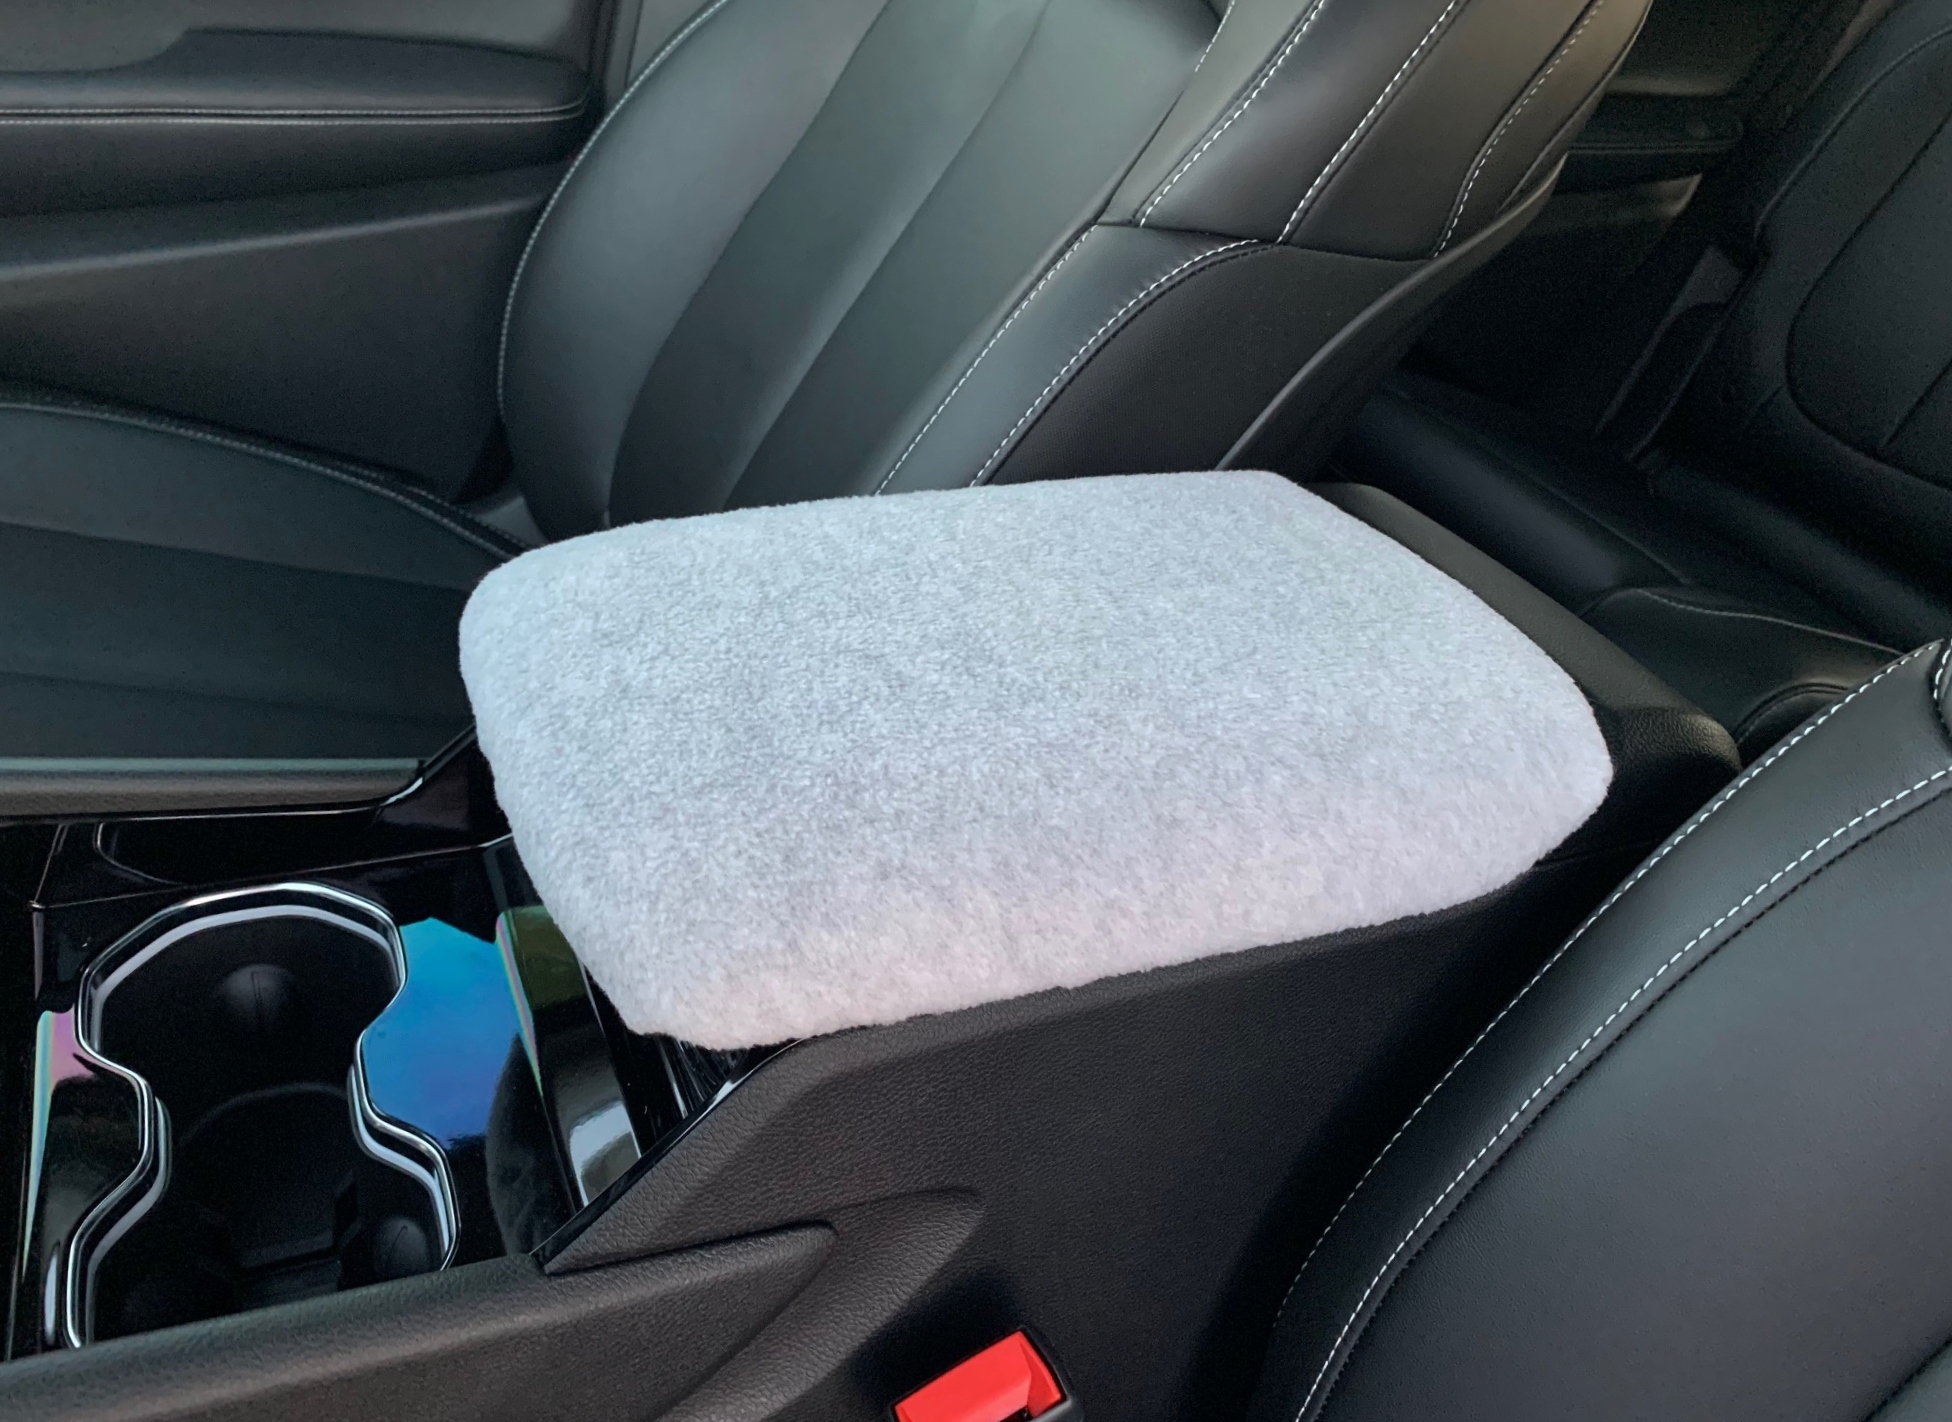 Buy Fleece Center Console Armrest Cover fits the Jeep Grand Cherokee L 2021-2022